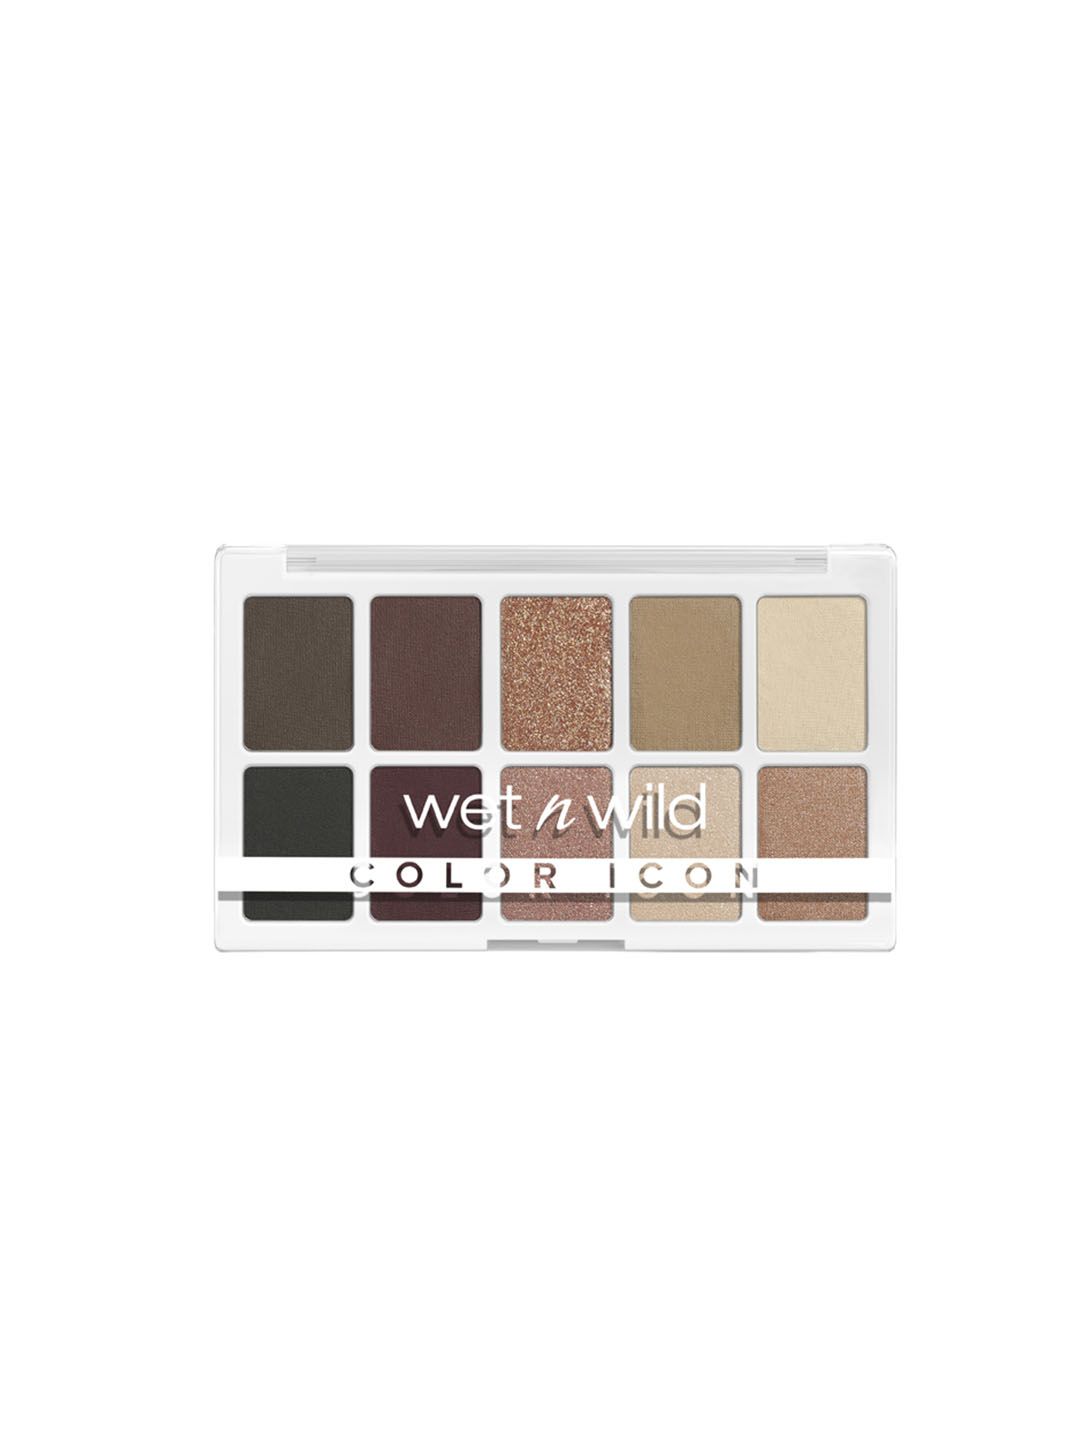 Wet n Wild Color Icon 10 Pan Shadow Palette- Nude Awakening 1114073E Price in India